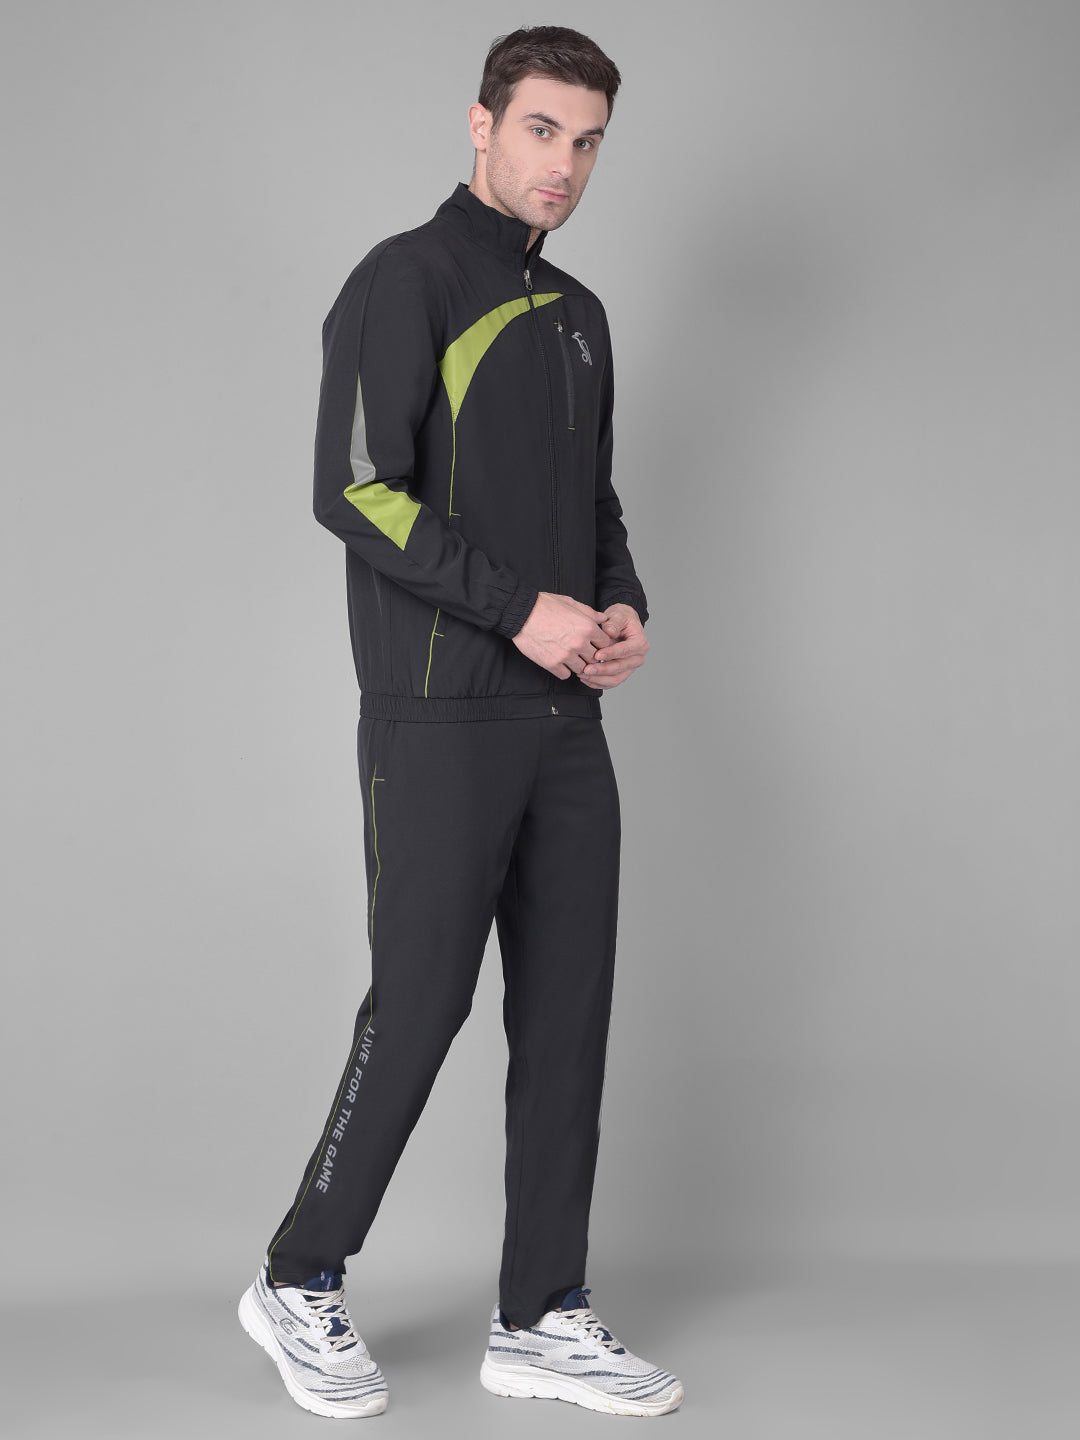 Kookaburra's Black Track Suit for Dynamic Style on and off the Track